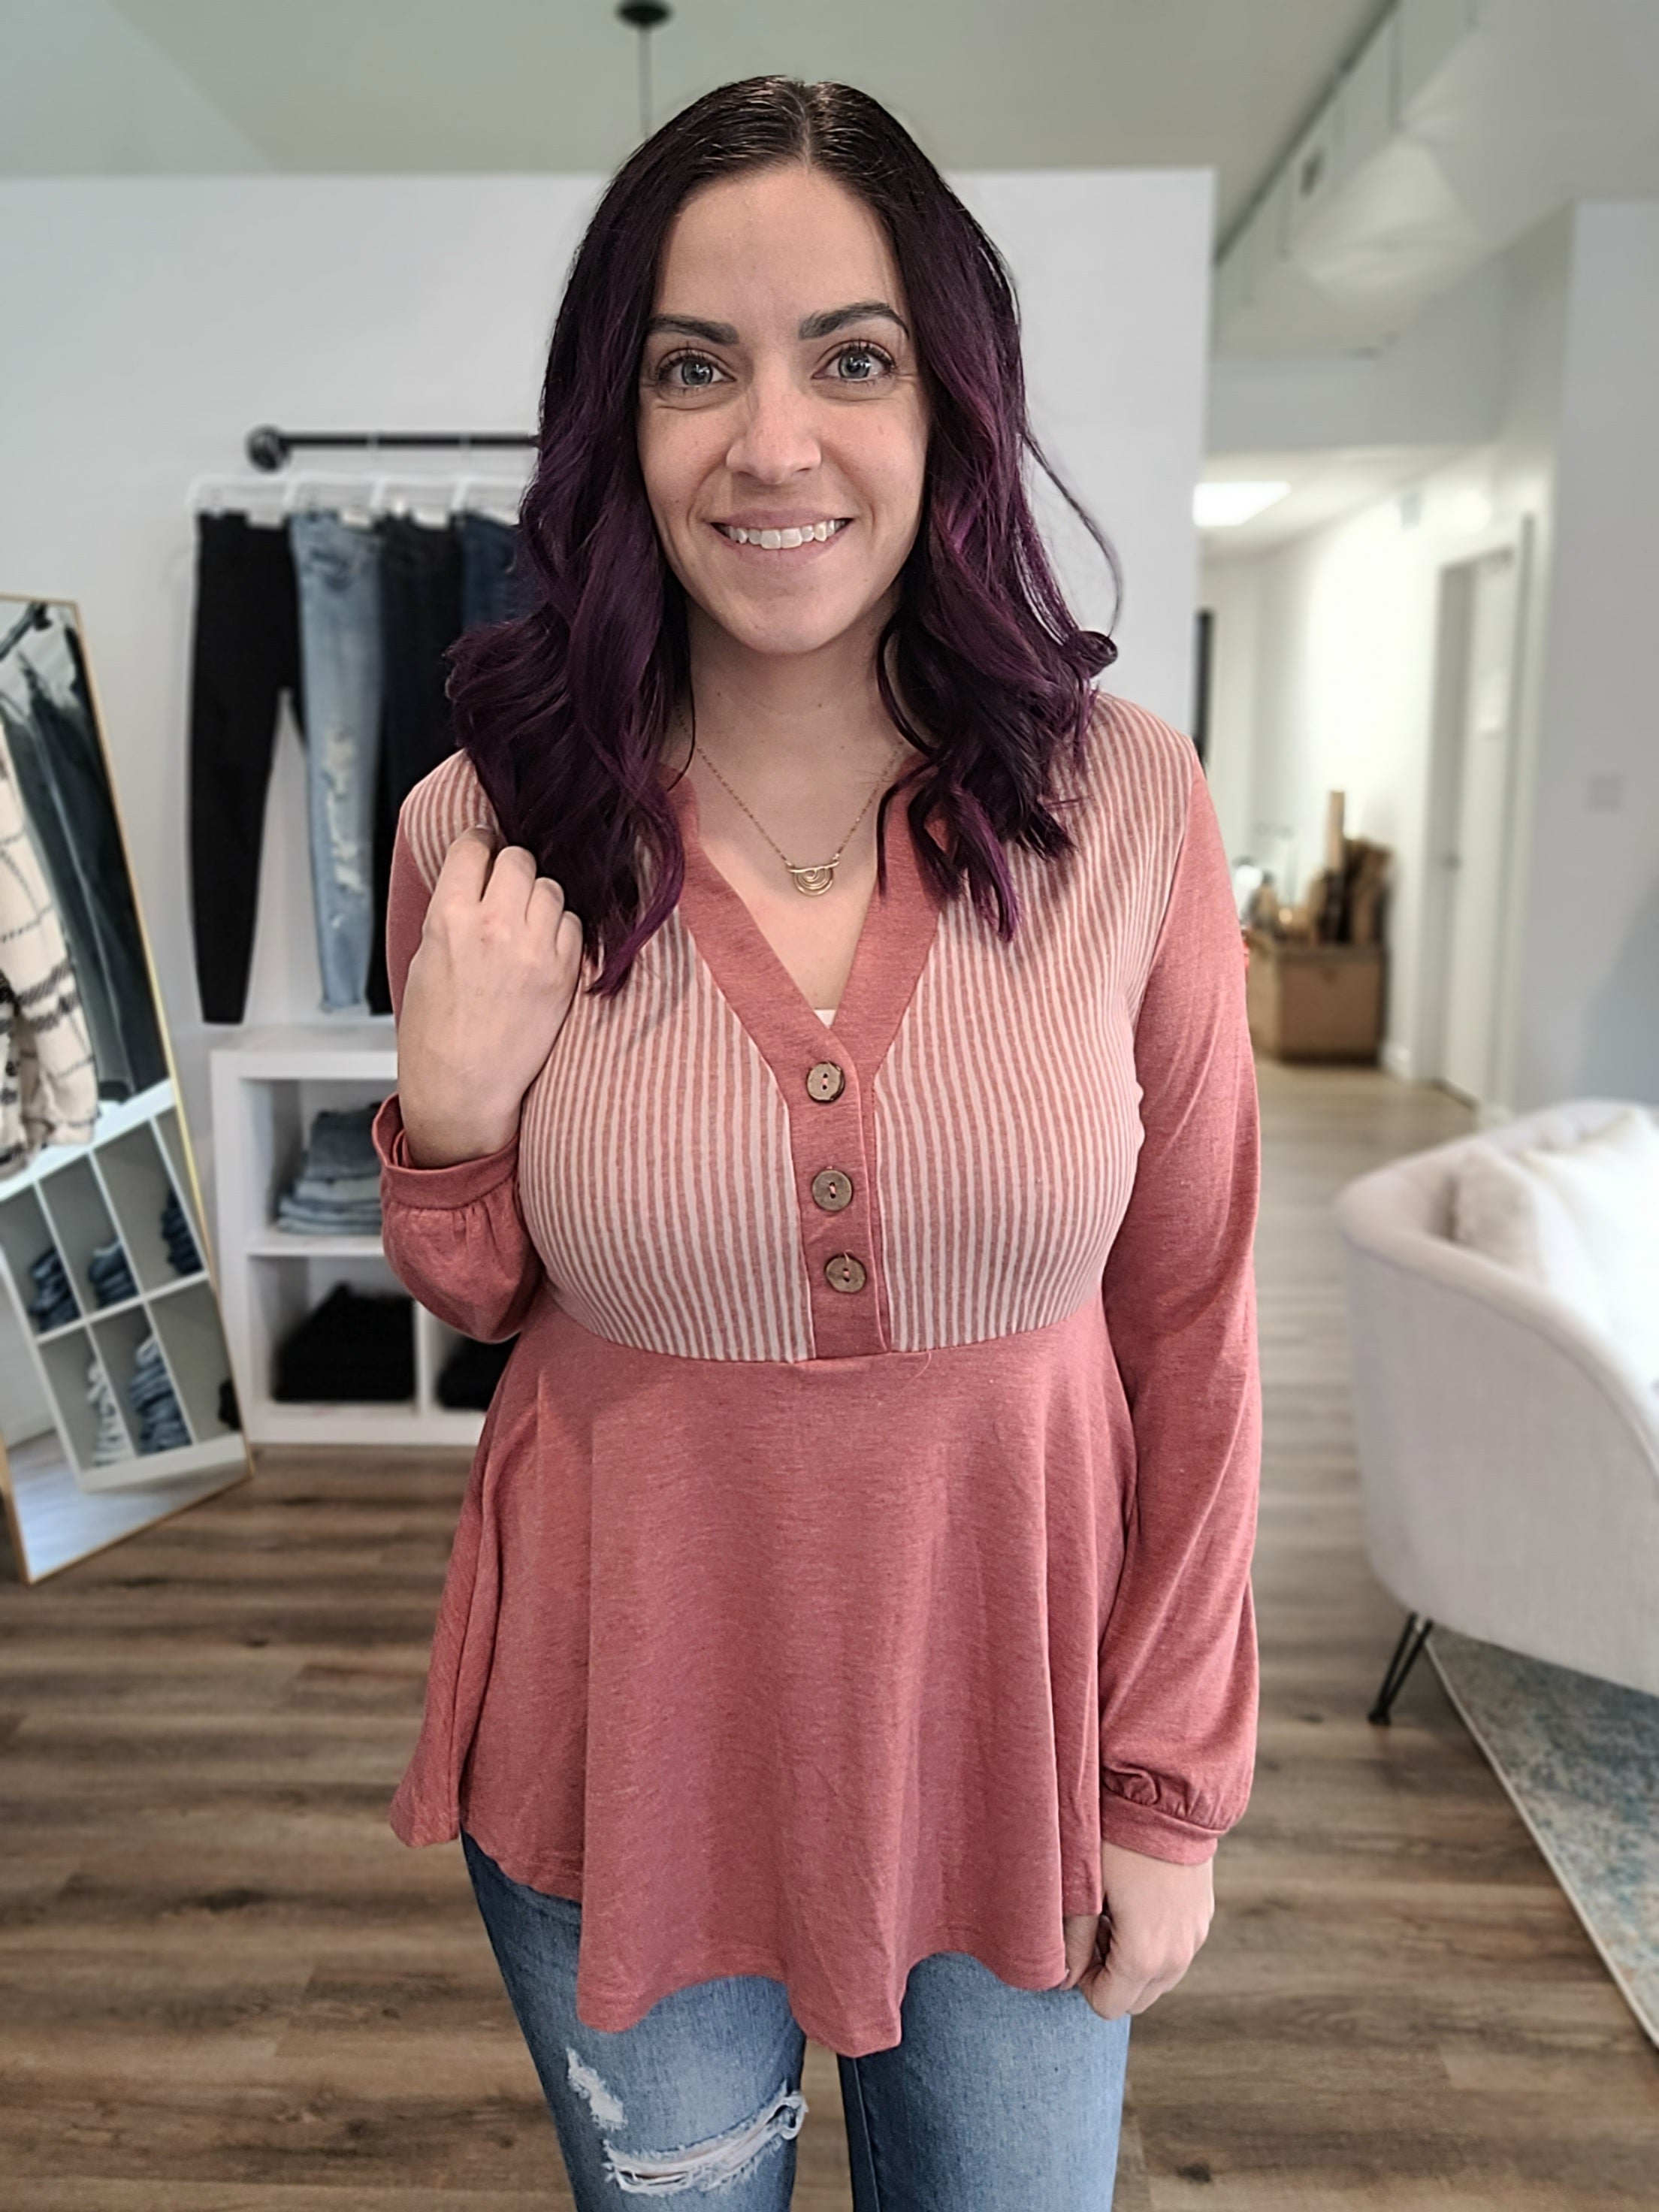 Shop Courtney Button Top with Stripe Detail-Shirts & Tops at Ruby Joy Boutique, a Women's Clothing Store in Pickerington, Ohio